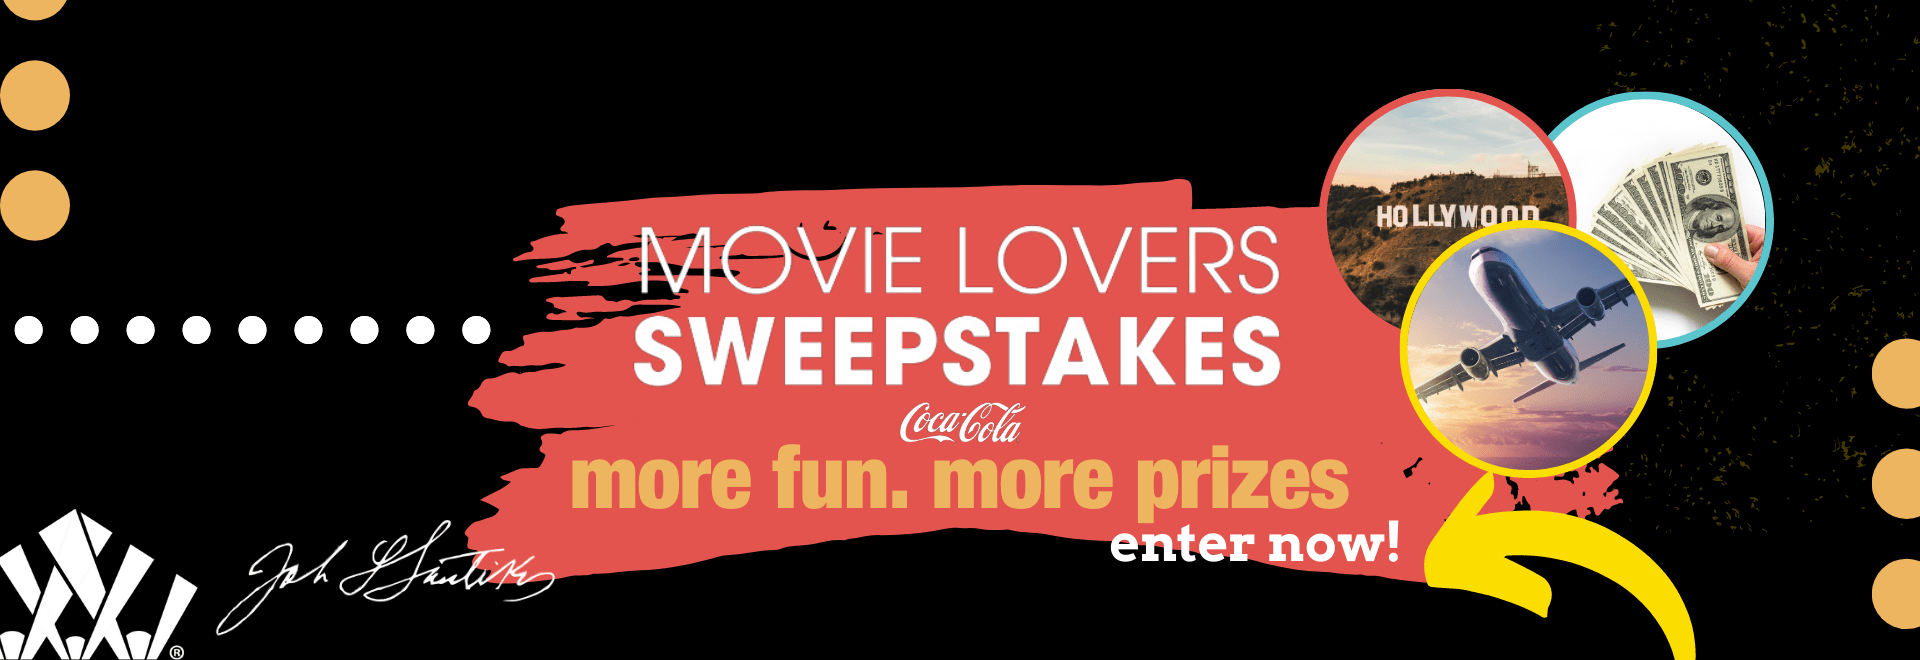 Fun ad for Santikos Entertainment Movie Lovers Sweepstakes featuring images of the grand prize, bold text and logo sized for mobile.